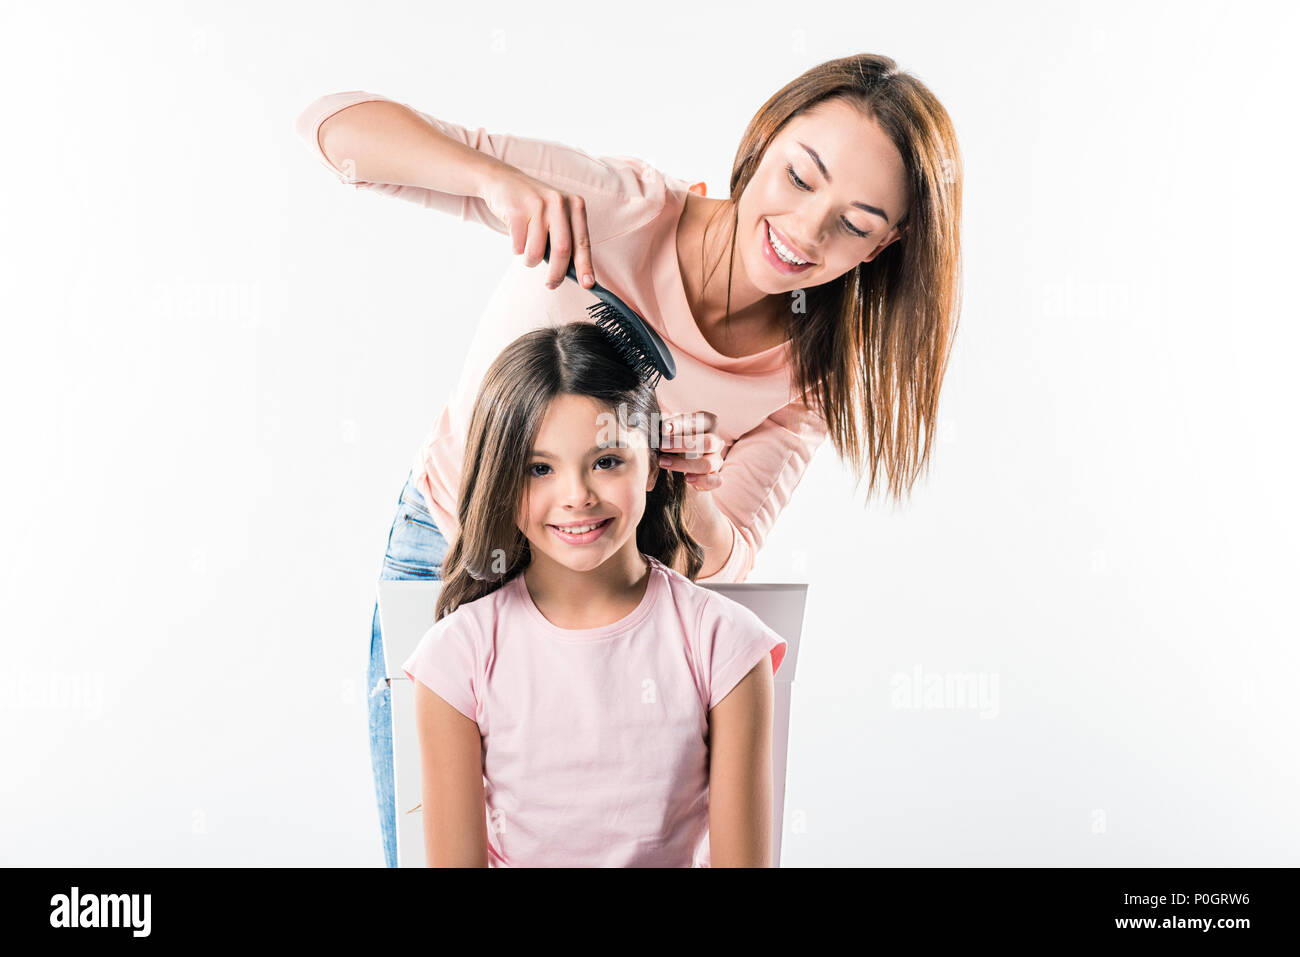 Mother combing daughters hair isolated on white Stock Photo